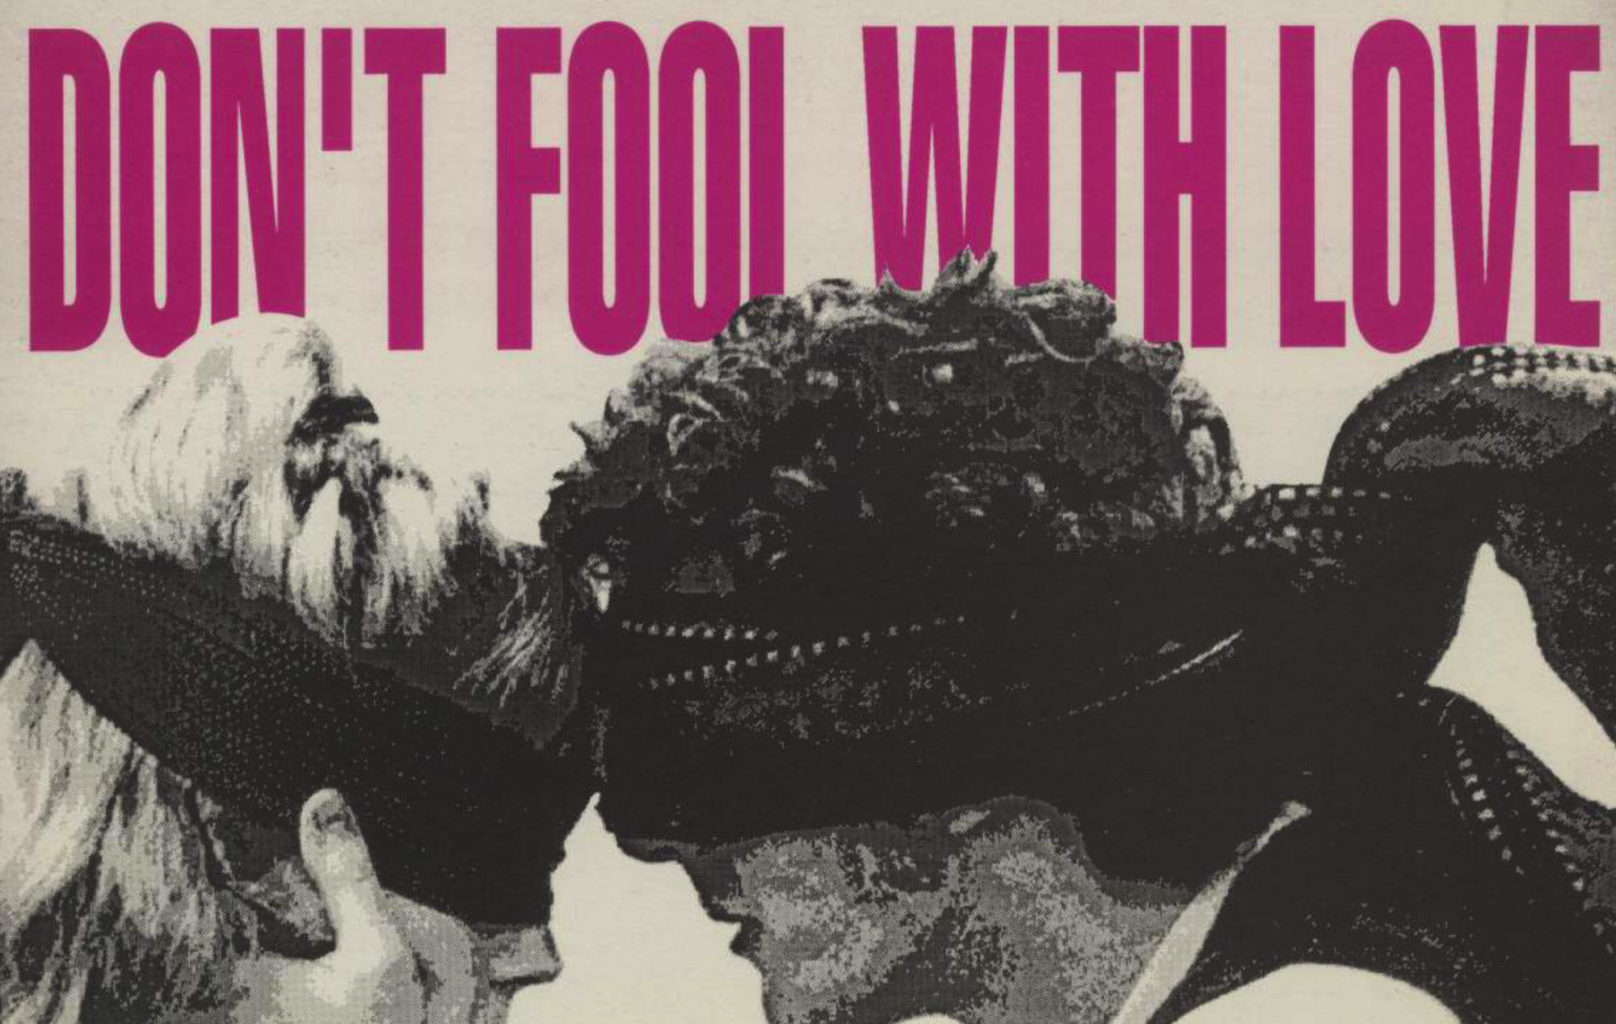 Programme for Cheek by Jowl’s productions of Don’t Fool With Love / The Blind Men